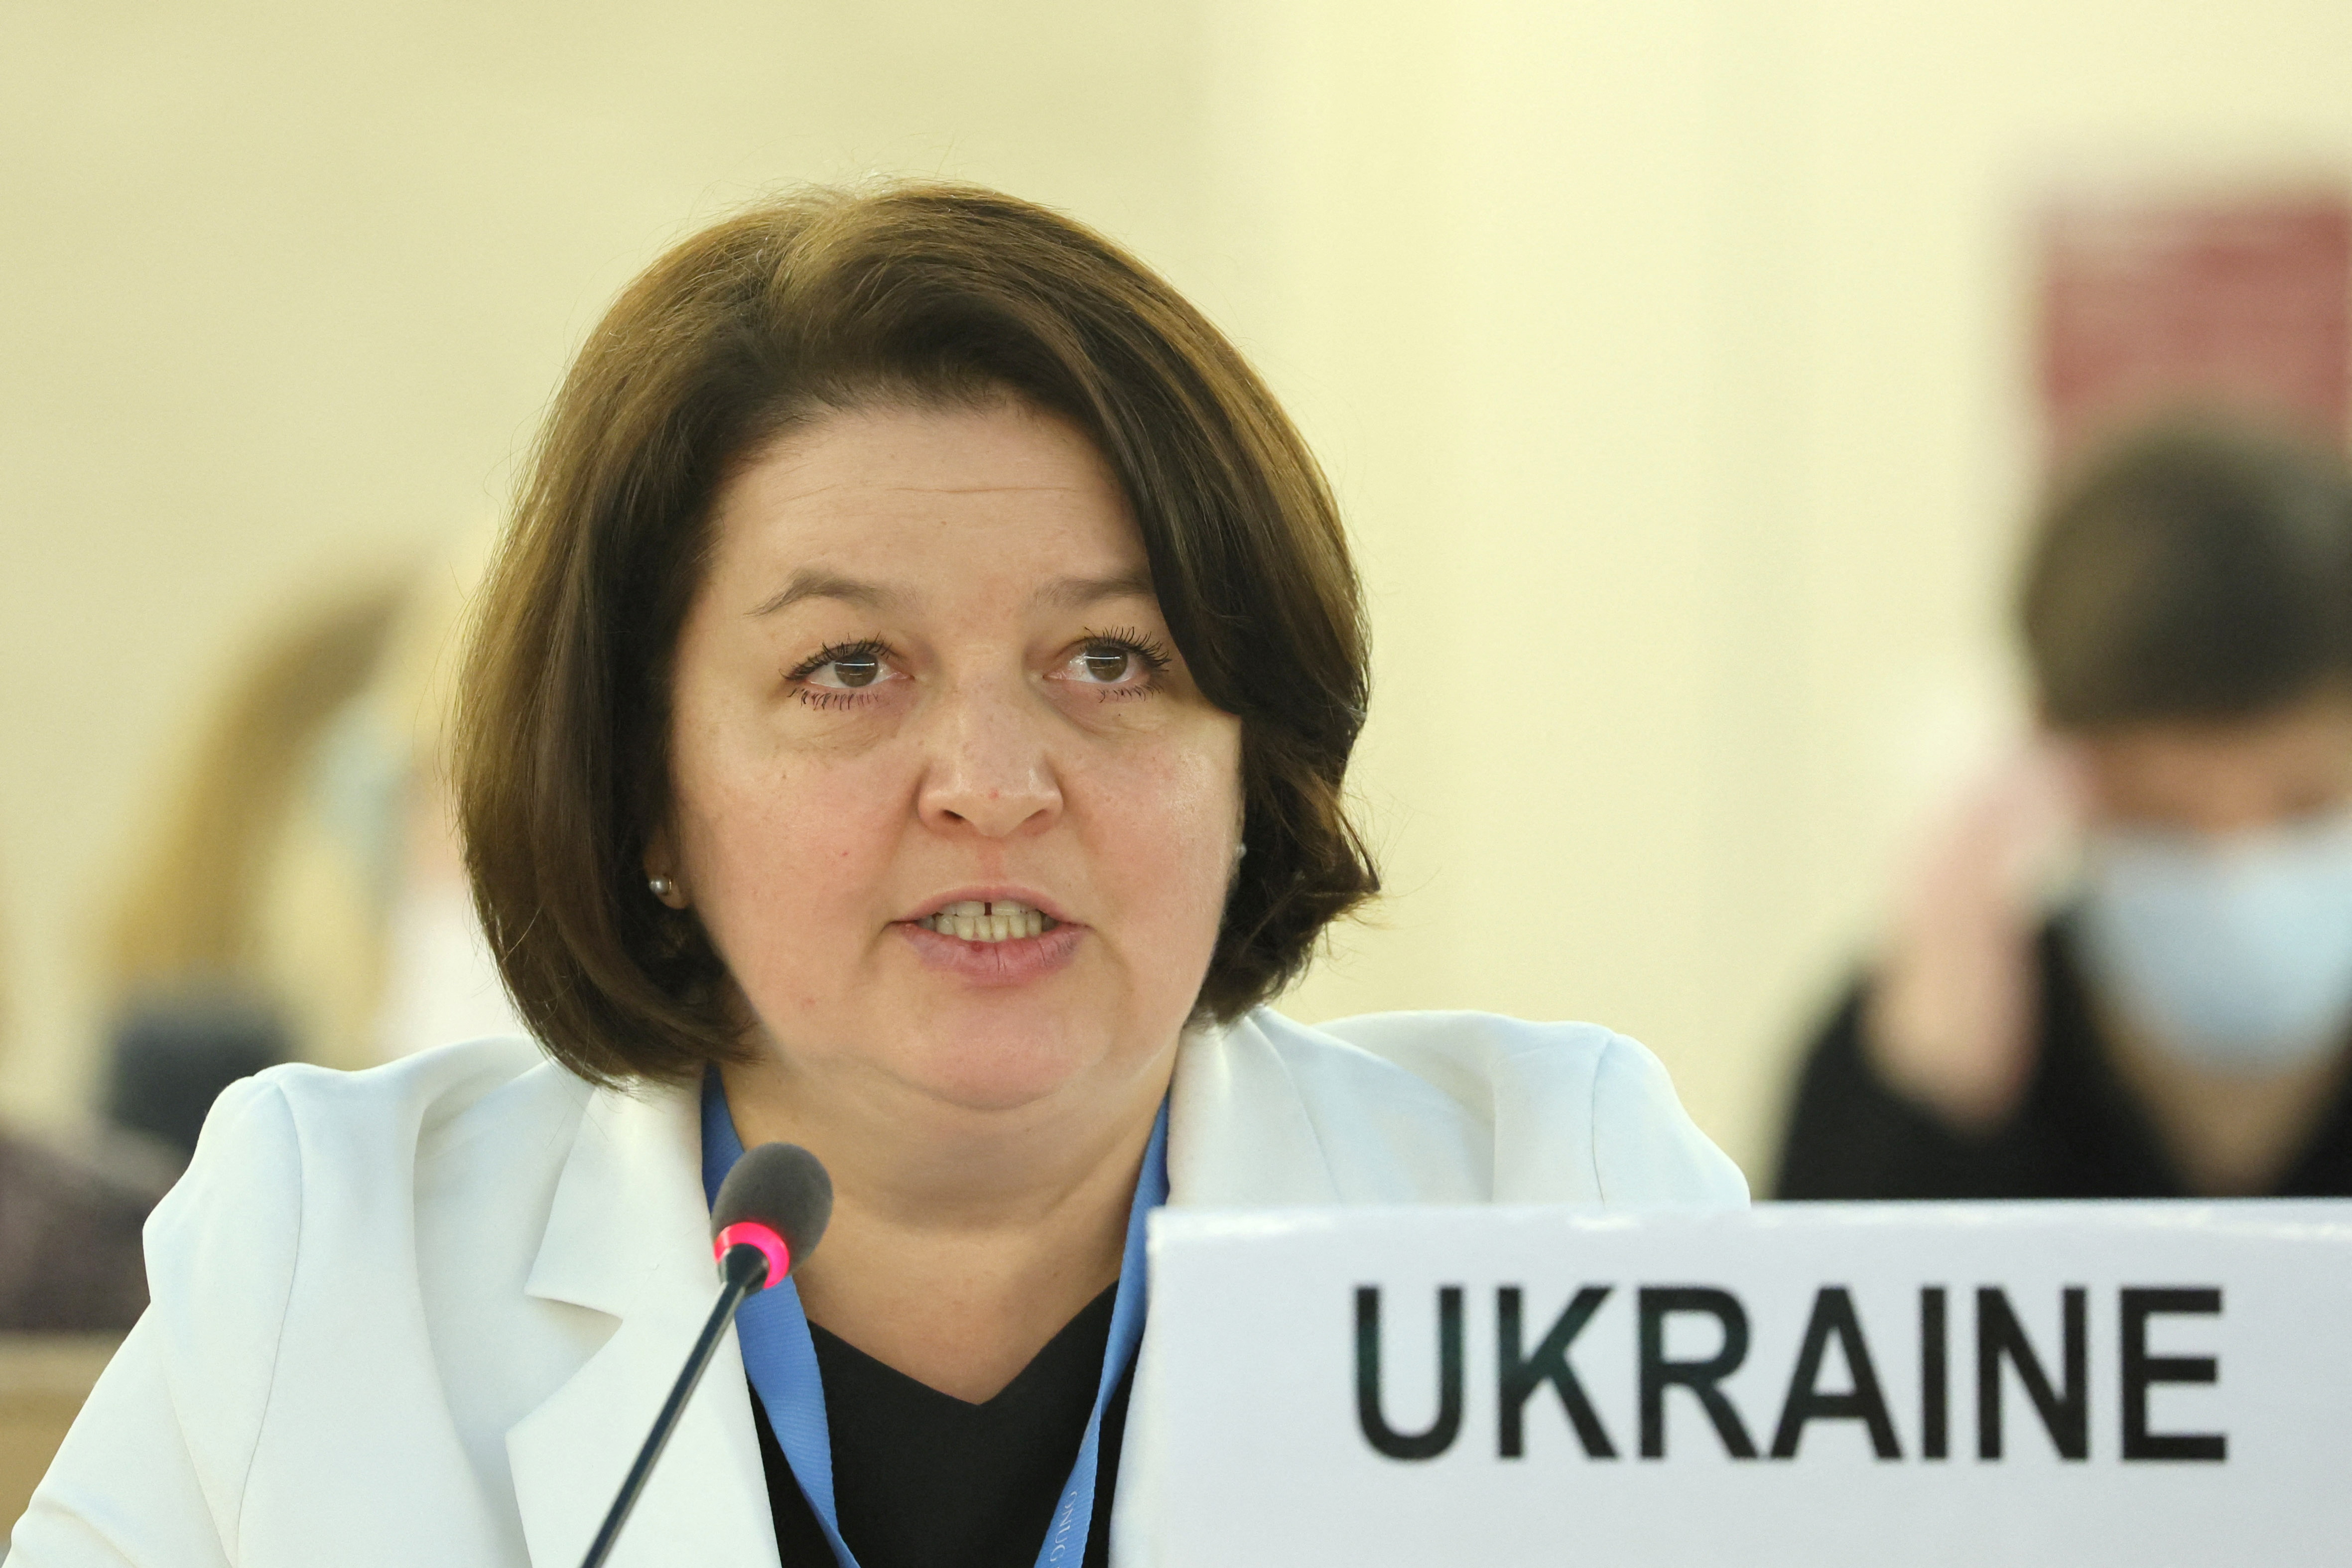 Ukraine's ambassador Yevheniia Filipenko attends a special session of the Human Rights Council at the United Nations in Geneva, Switzerland, on March 4.